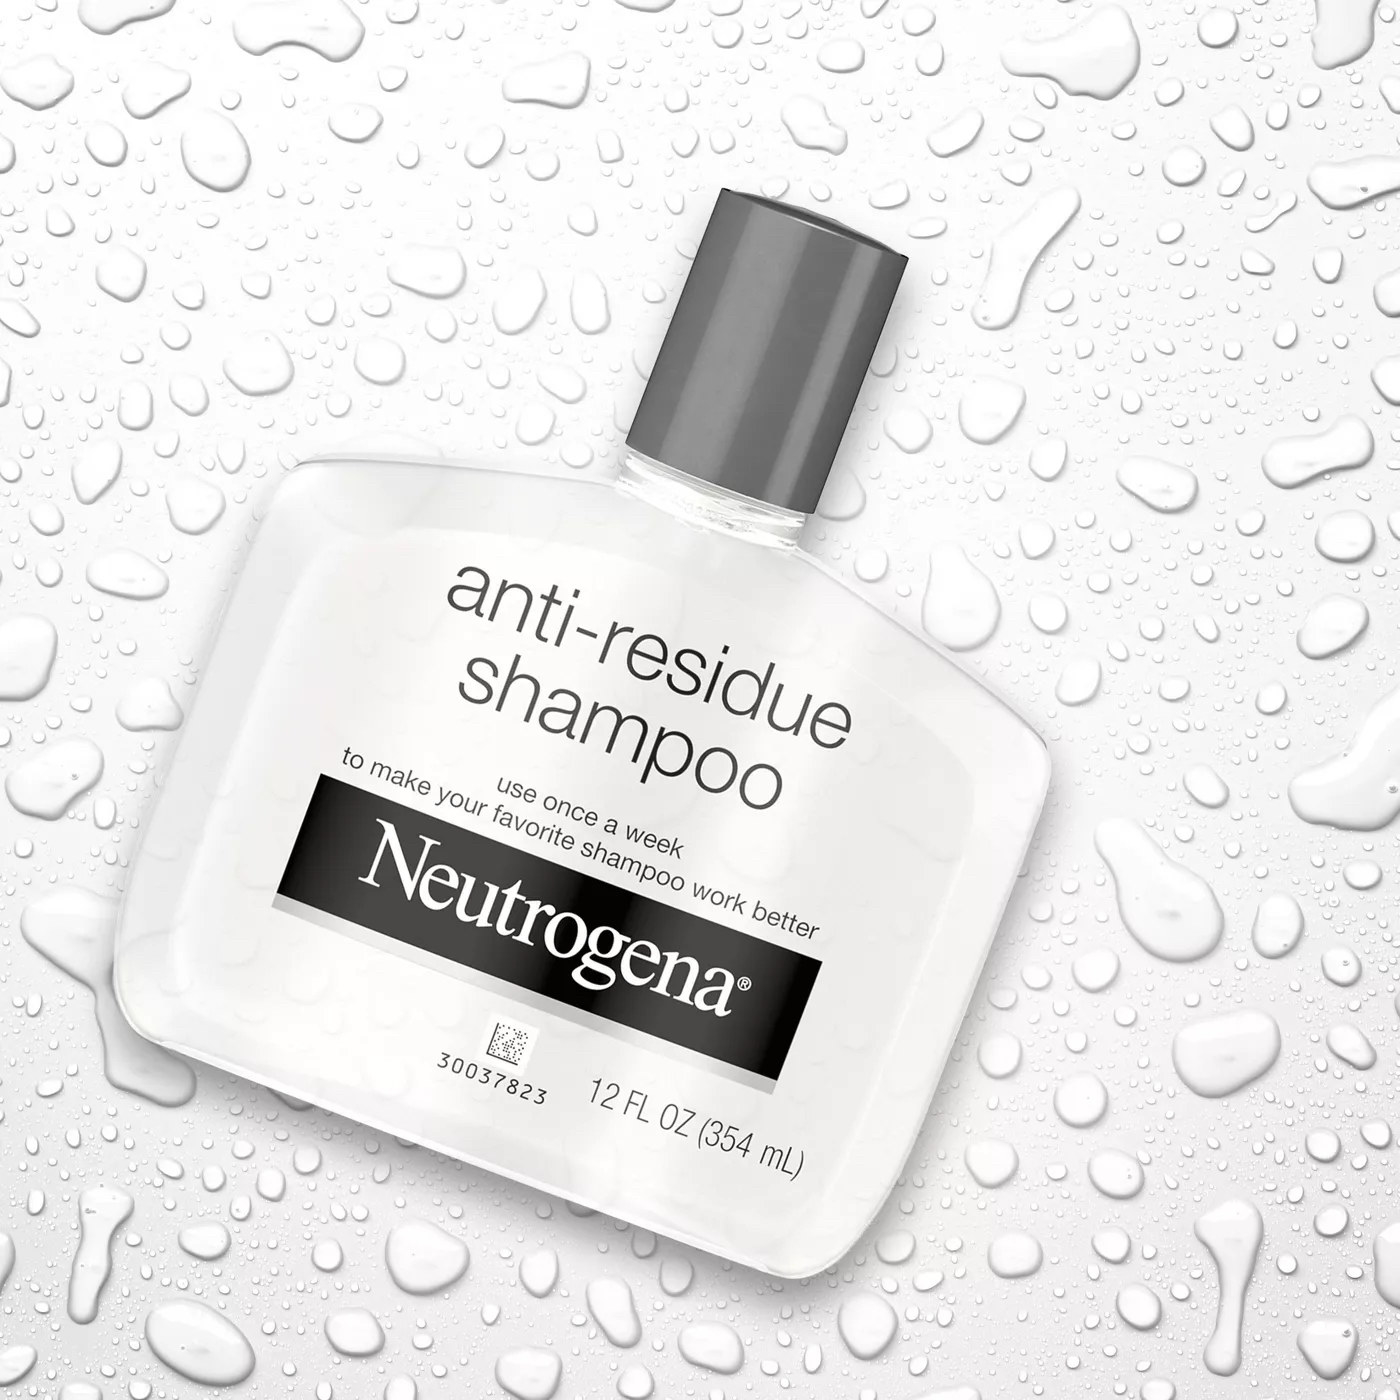 Bottle of Neutrogena anti-residue shampoo surrounded by water droplets